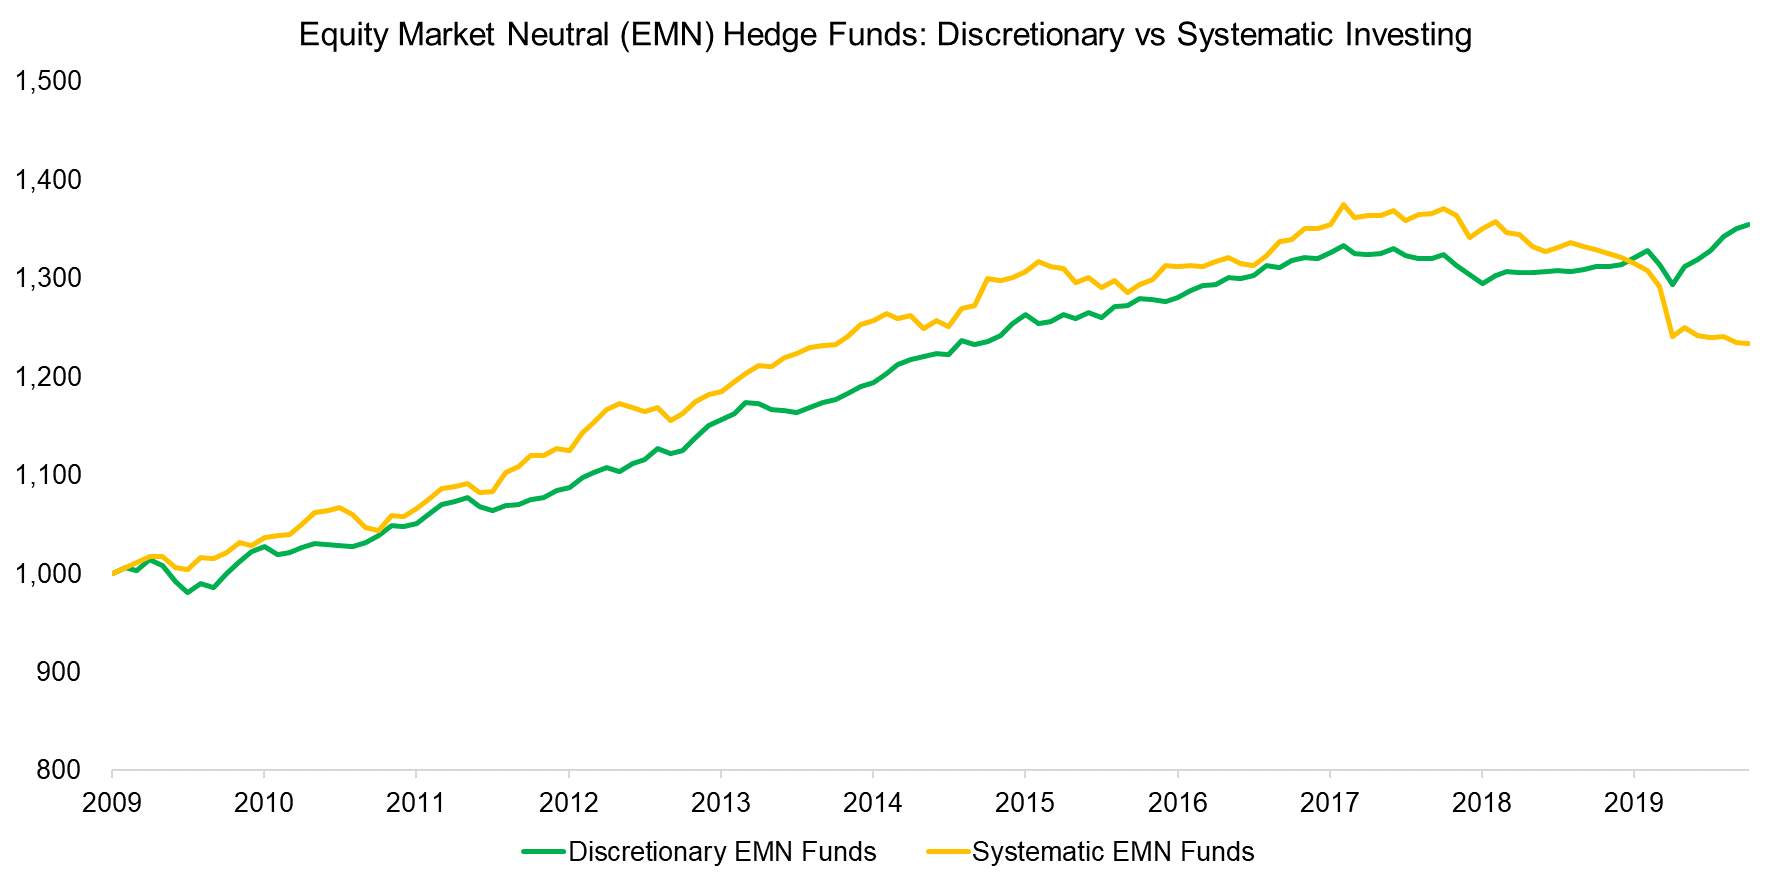 Equity Market Neutral (EMN) Hedge Funds Discretionary vs Systematic Investing